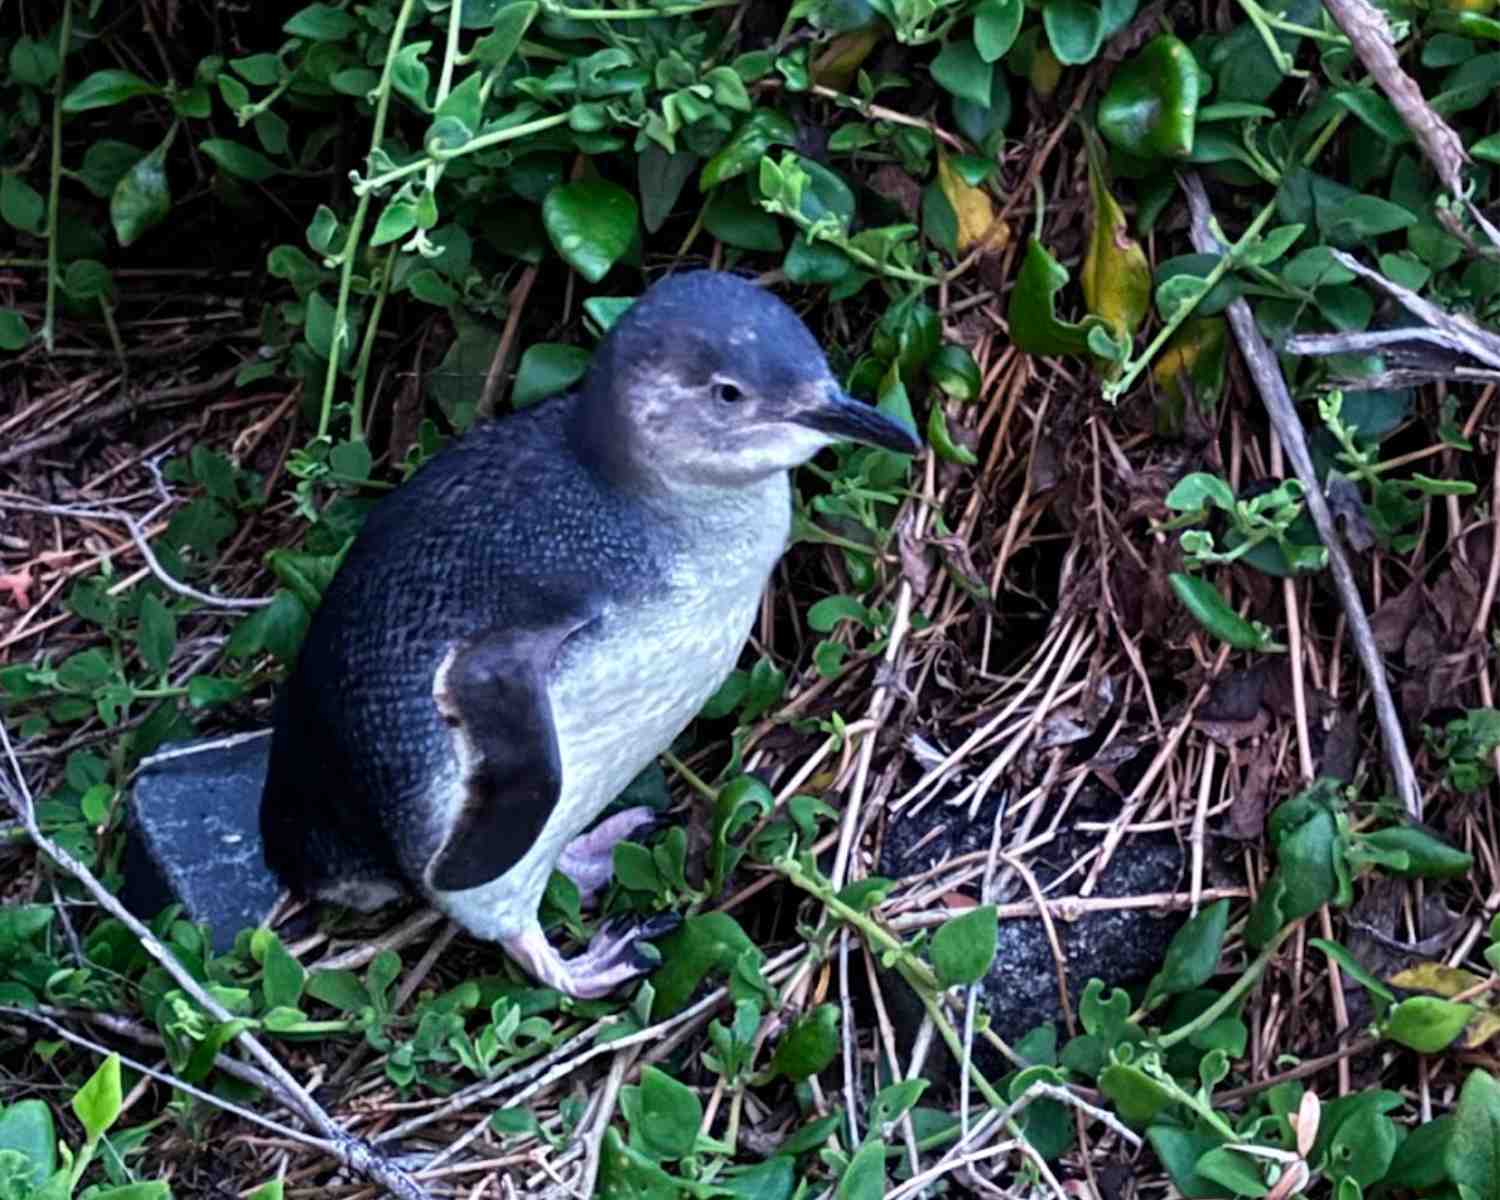 Where to see penguins in Tasmania